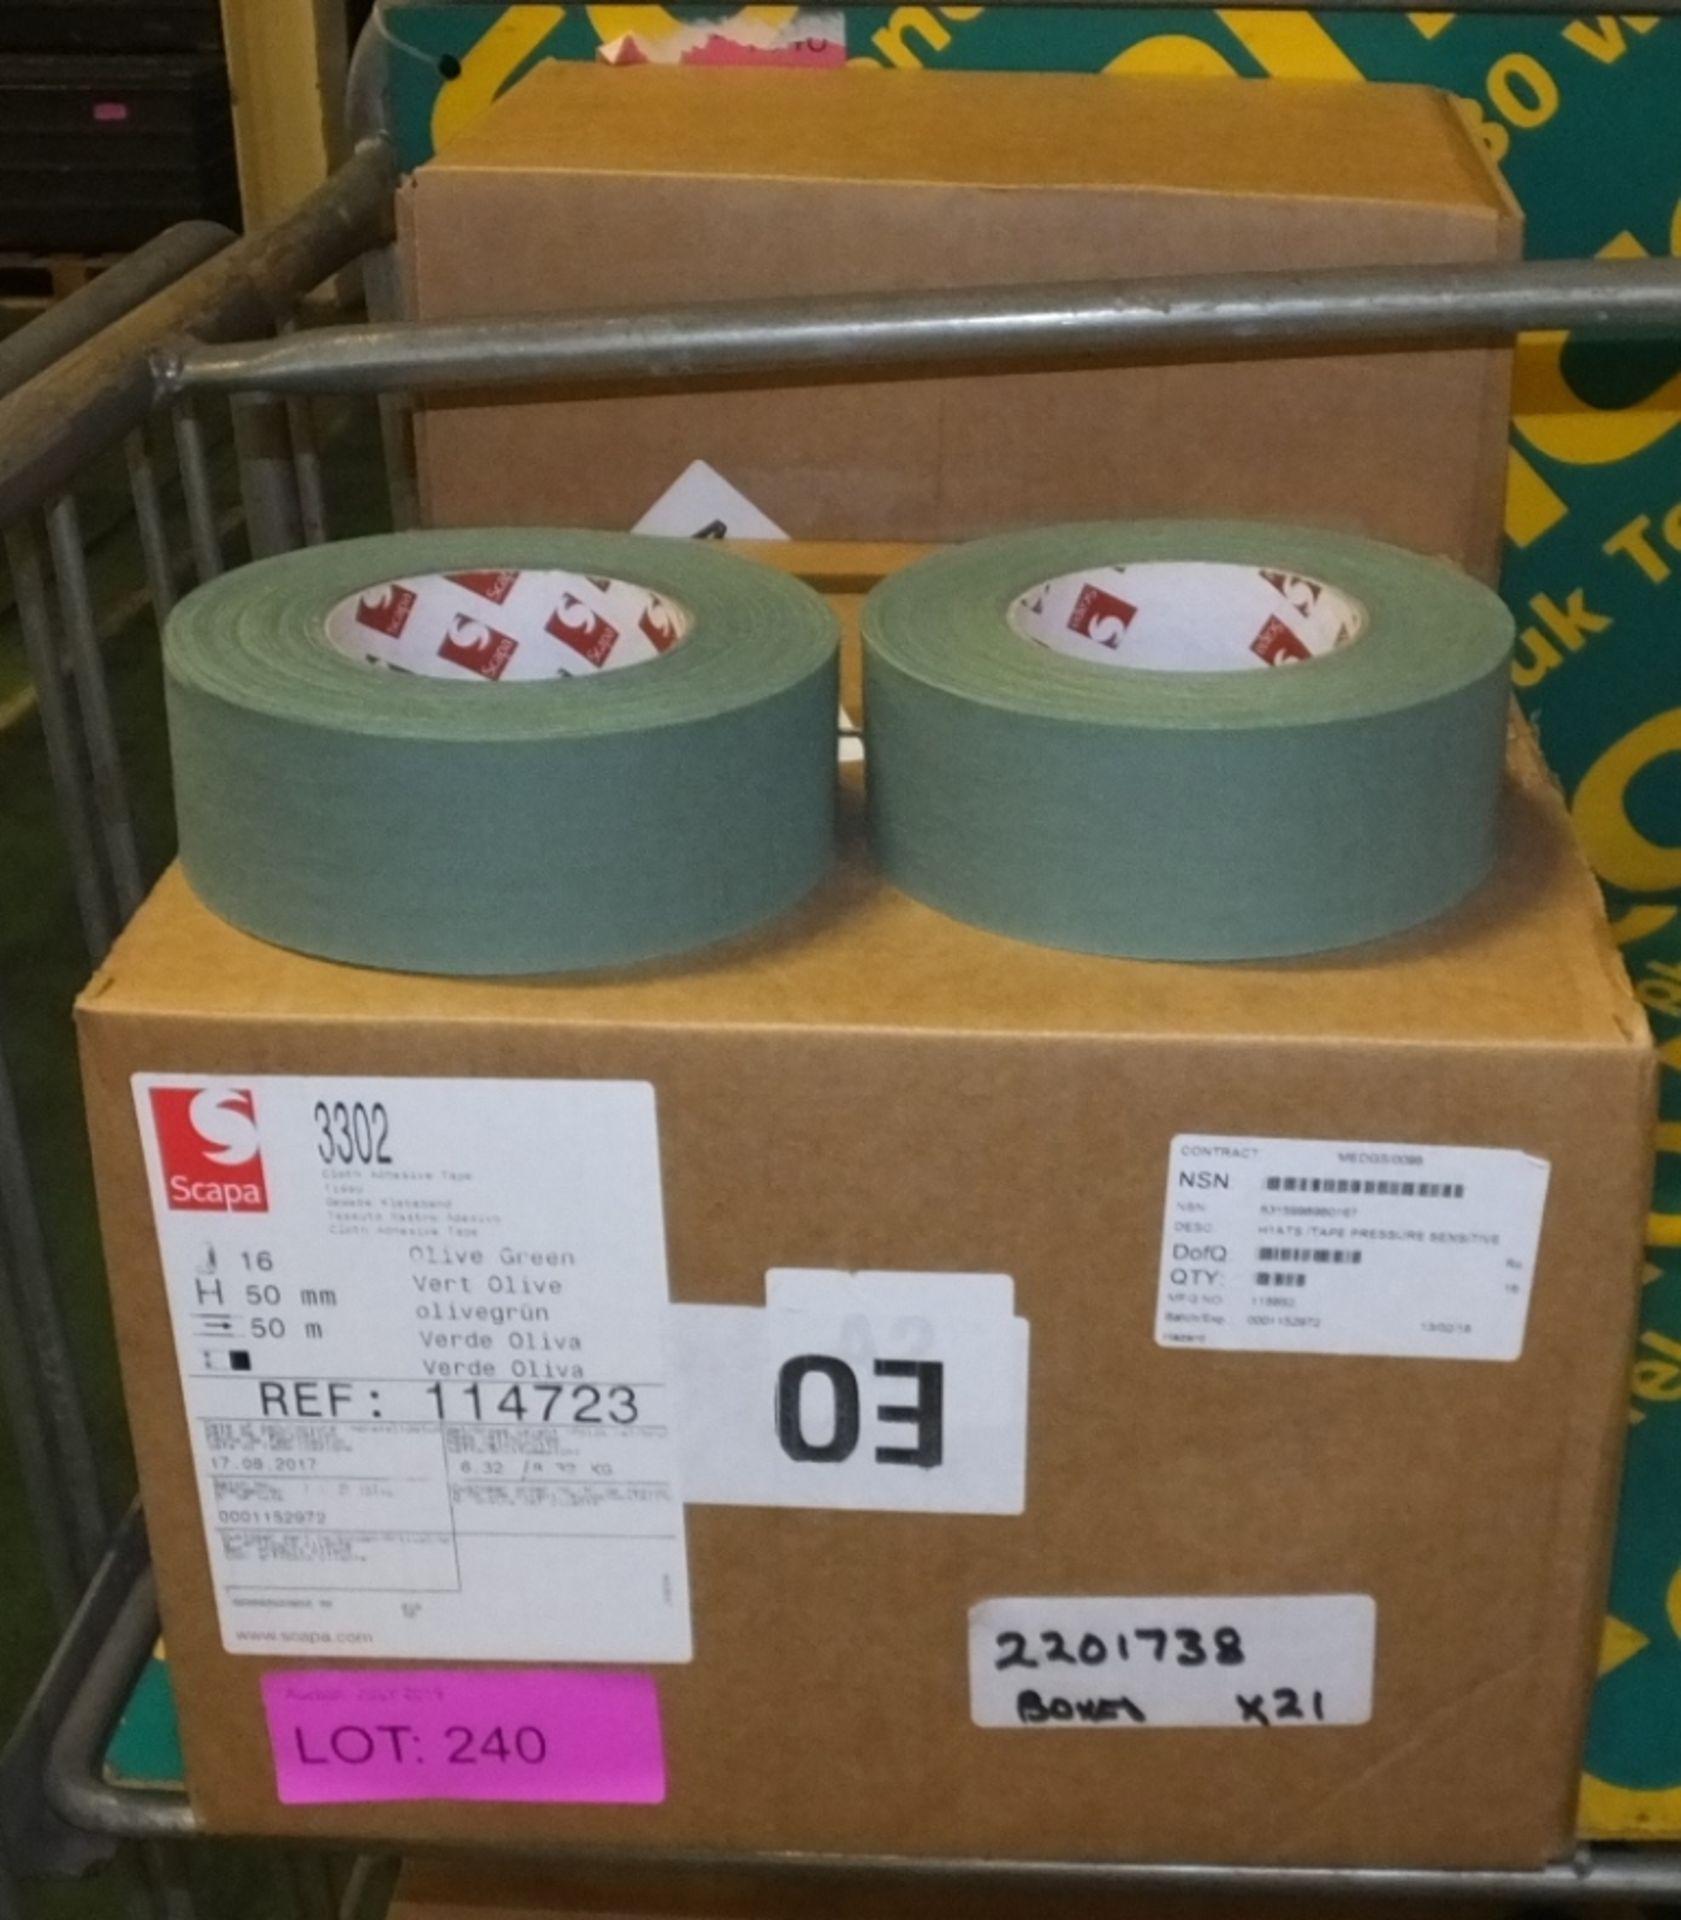 Scapa Adhesive Tape - Olive Green - 50mm x 50M - 16 Rolls Per Box - 2 boxes